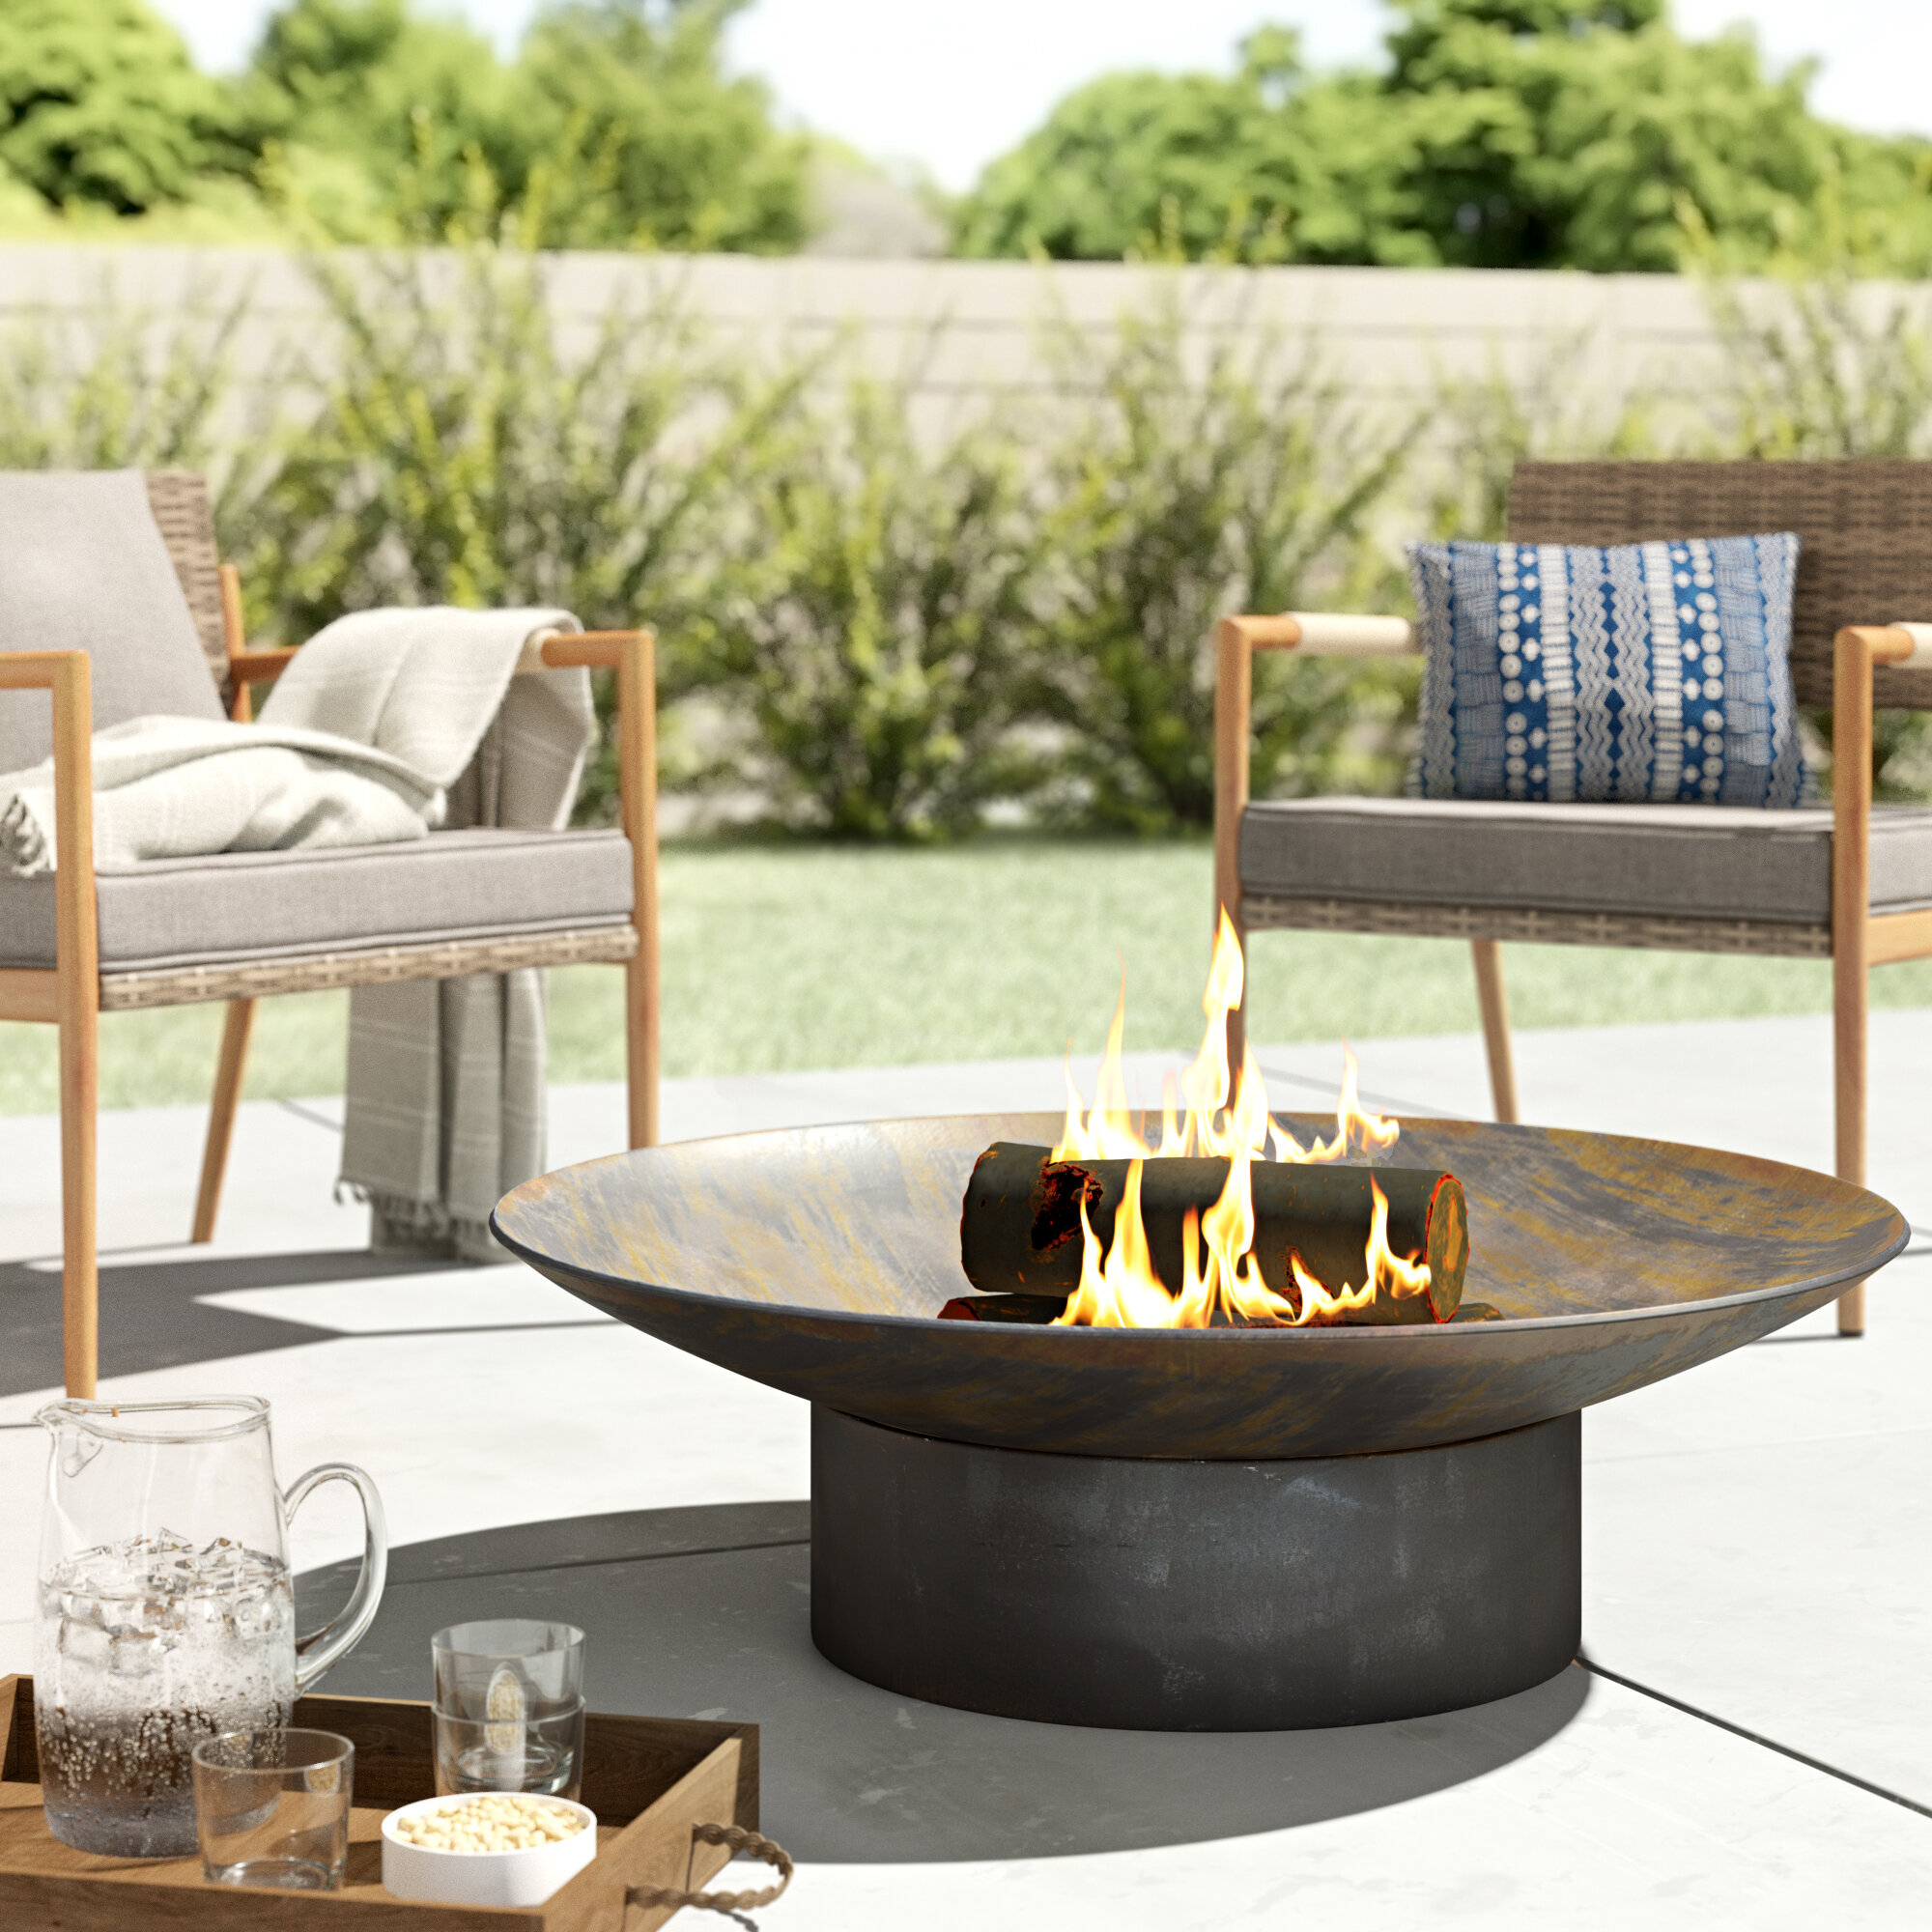 Where to Buy Wood for Fire Pit? 